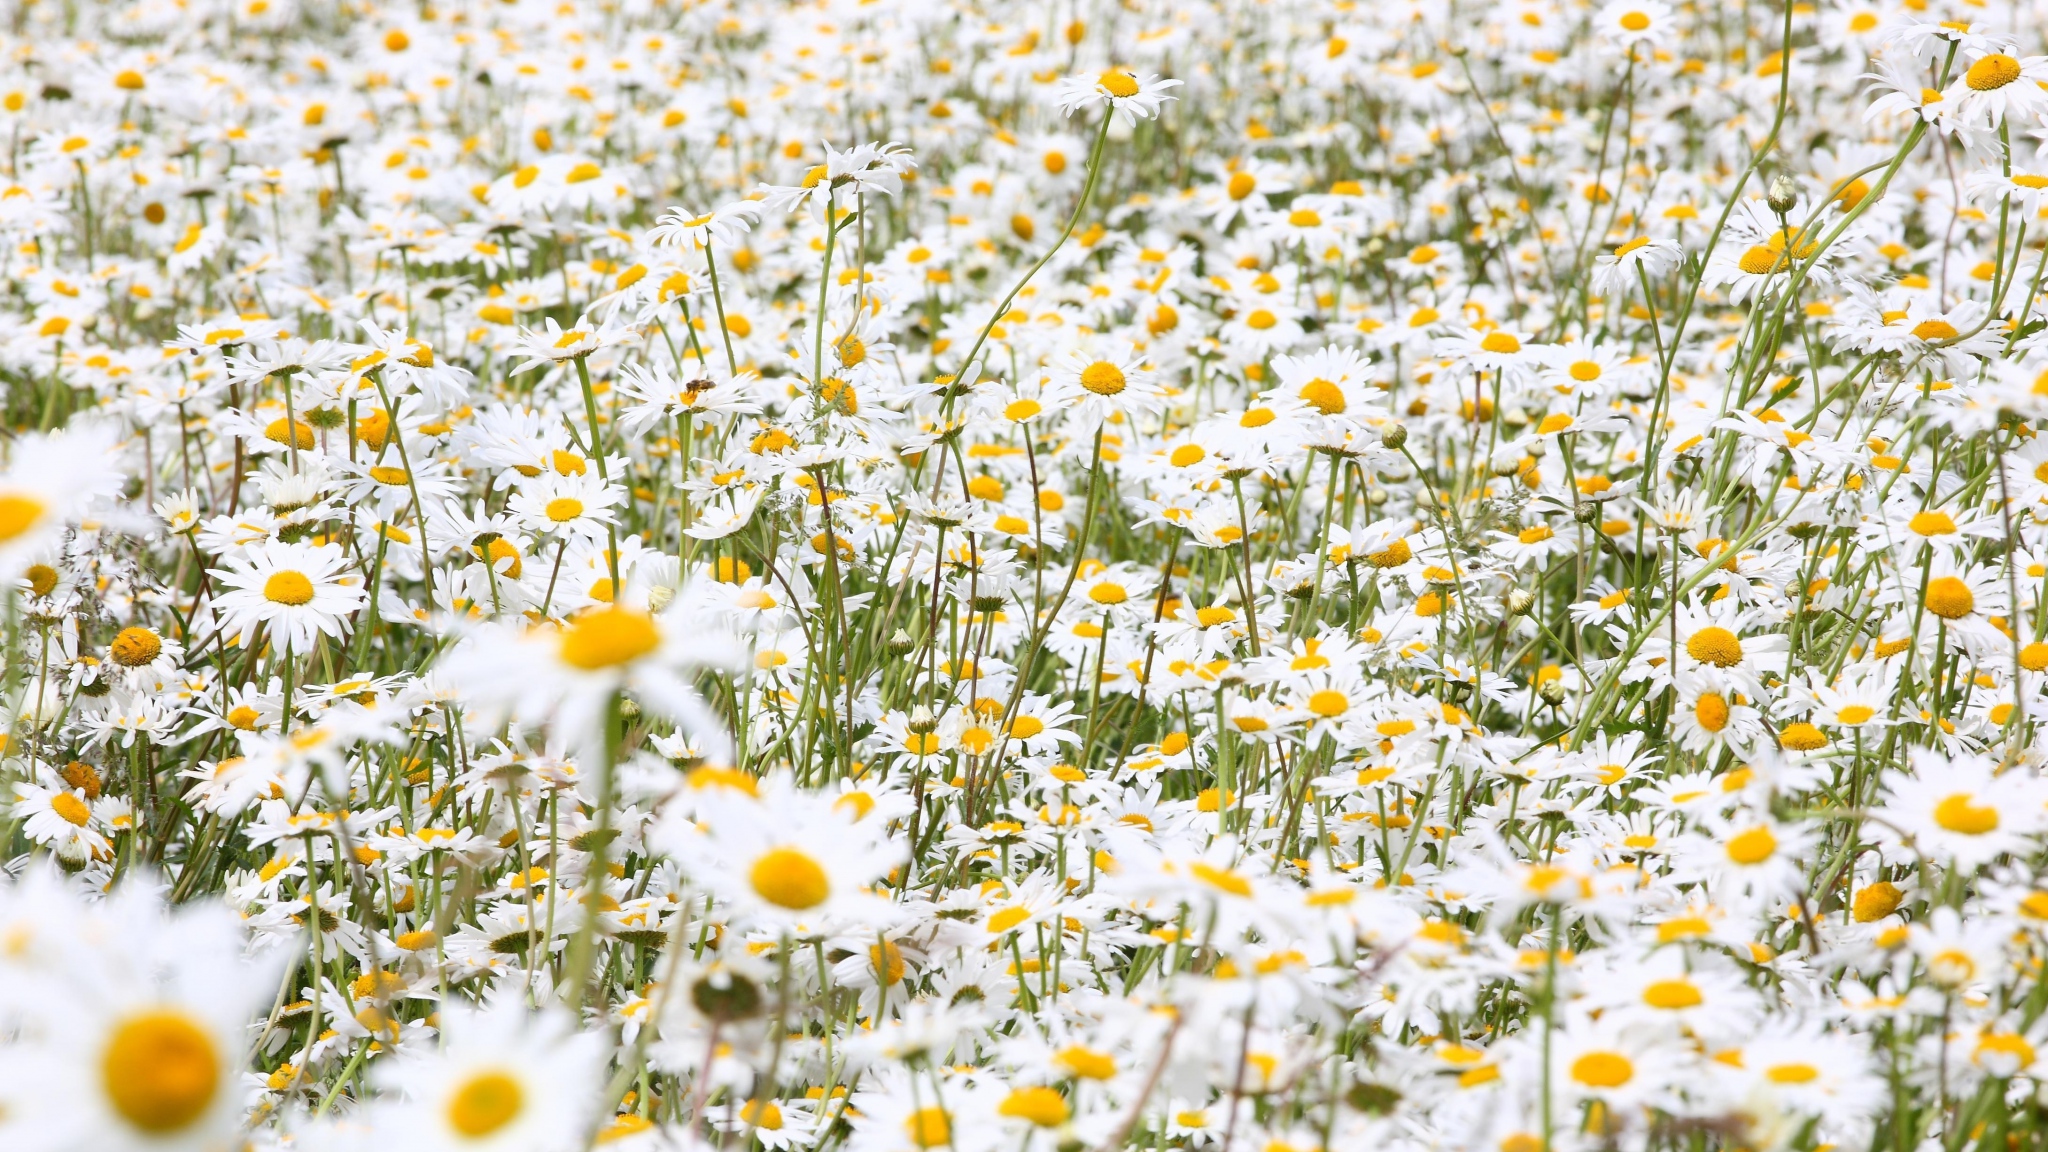 Download Wallpaper 2048x1152 Daisies, Flowers, Field, Many, Summer